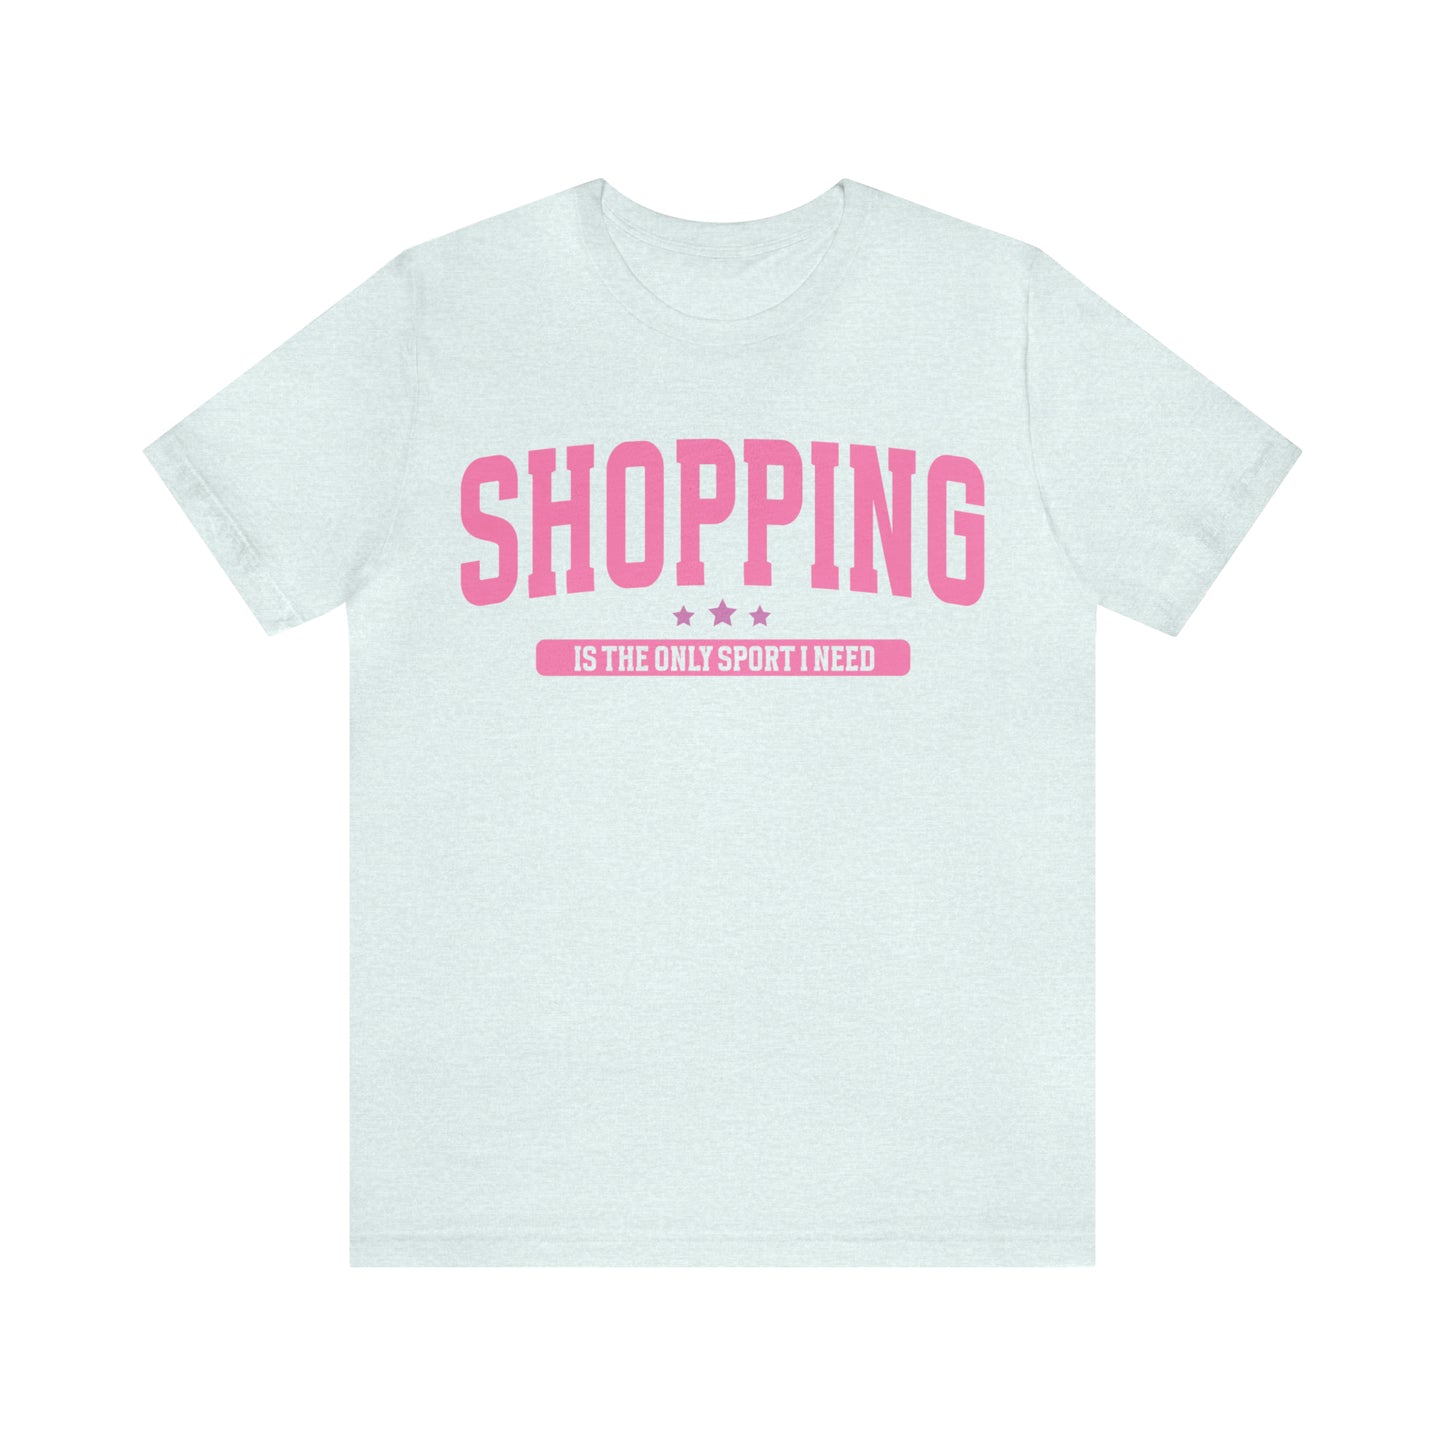 Shopping It's the Only Sport I Need Funny Sarcastic Shirt for Girls